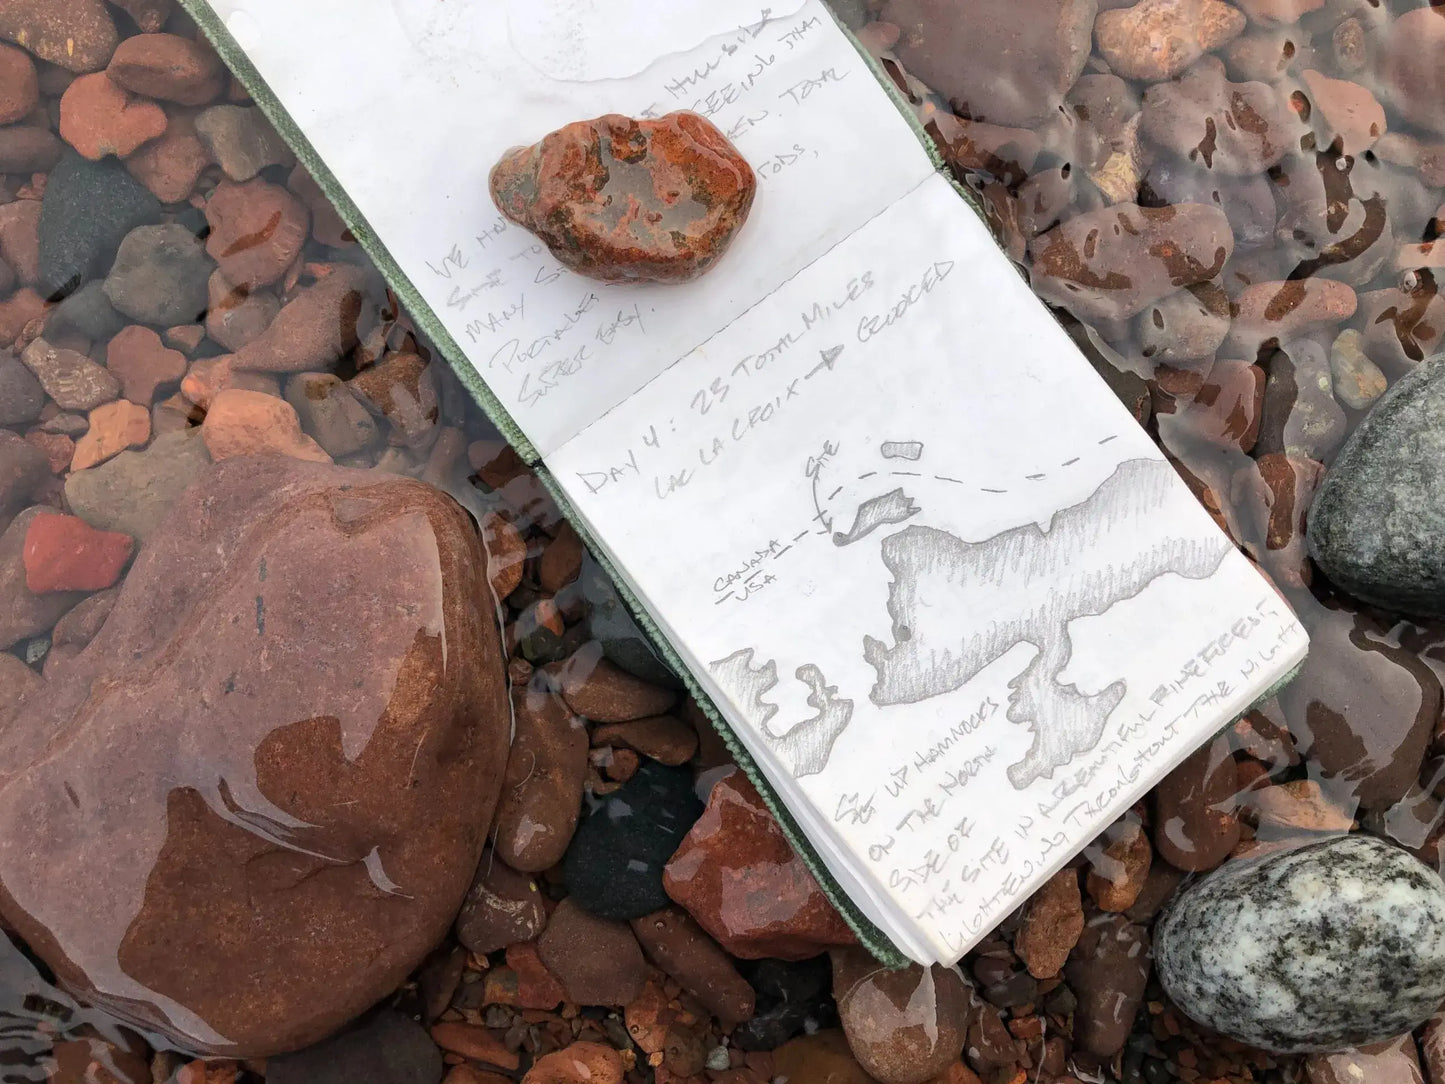 Writing on the inside of a notepad in water with rocks.